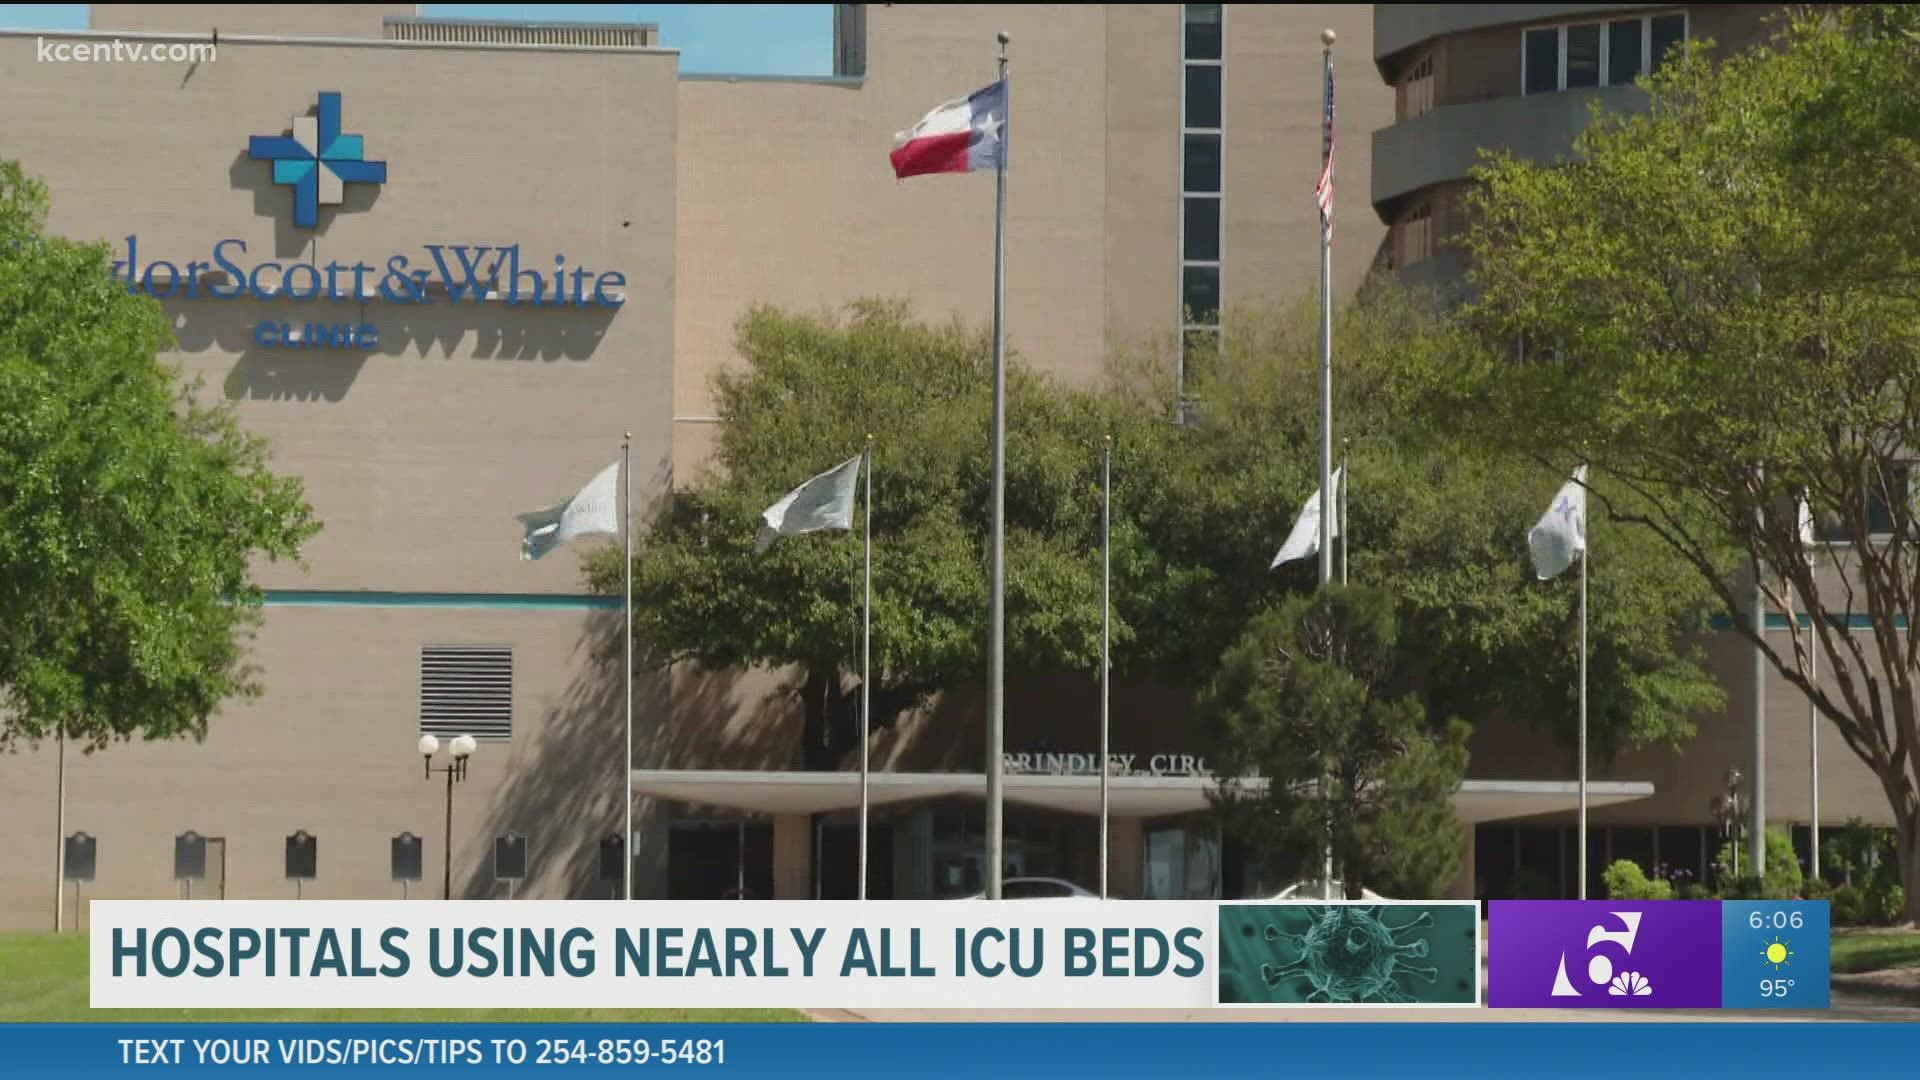 Baylor Scott & White said "hospitals may not be able to meet the critical healthcare needs of our our community," if intensive care occupancy continues to rise.